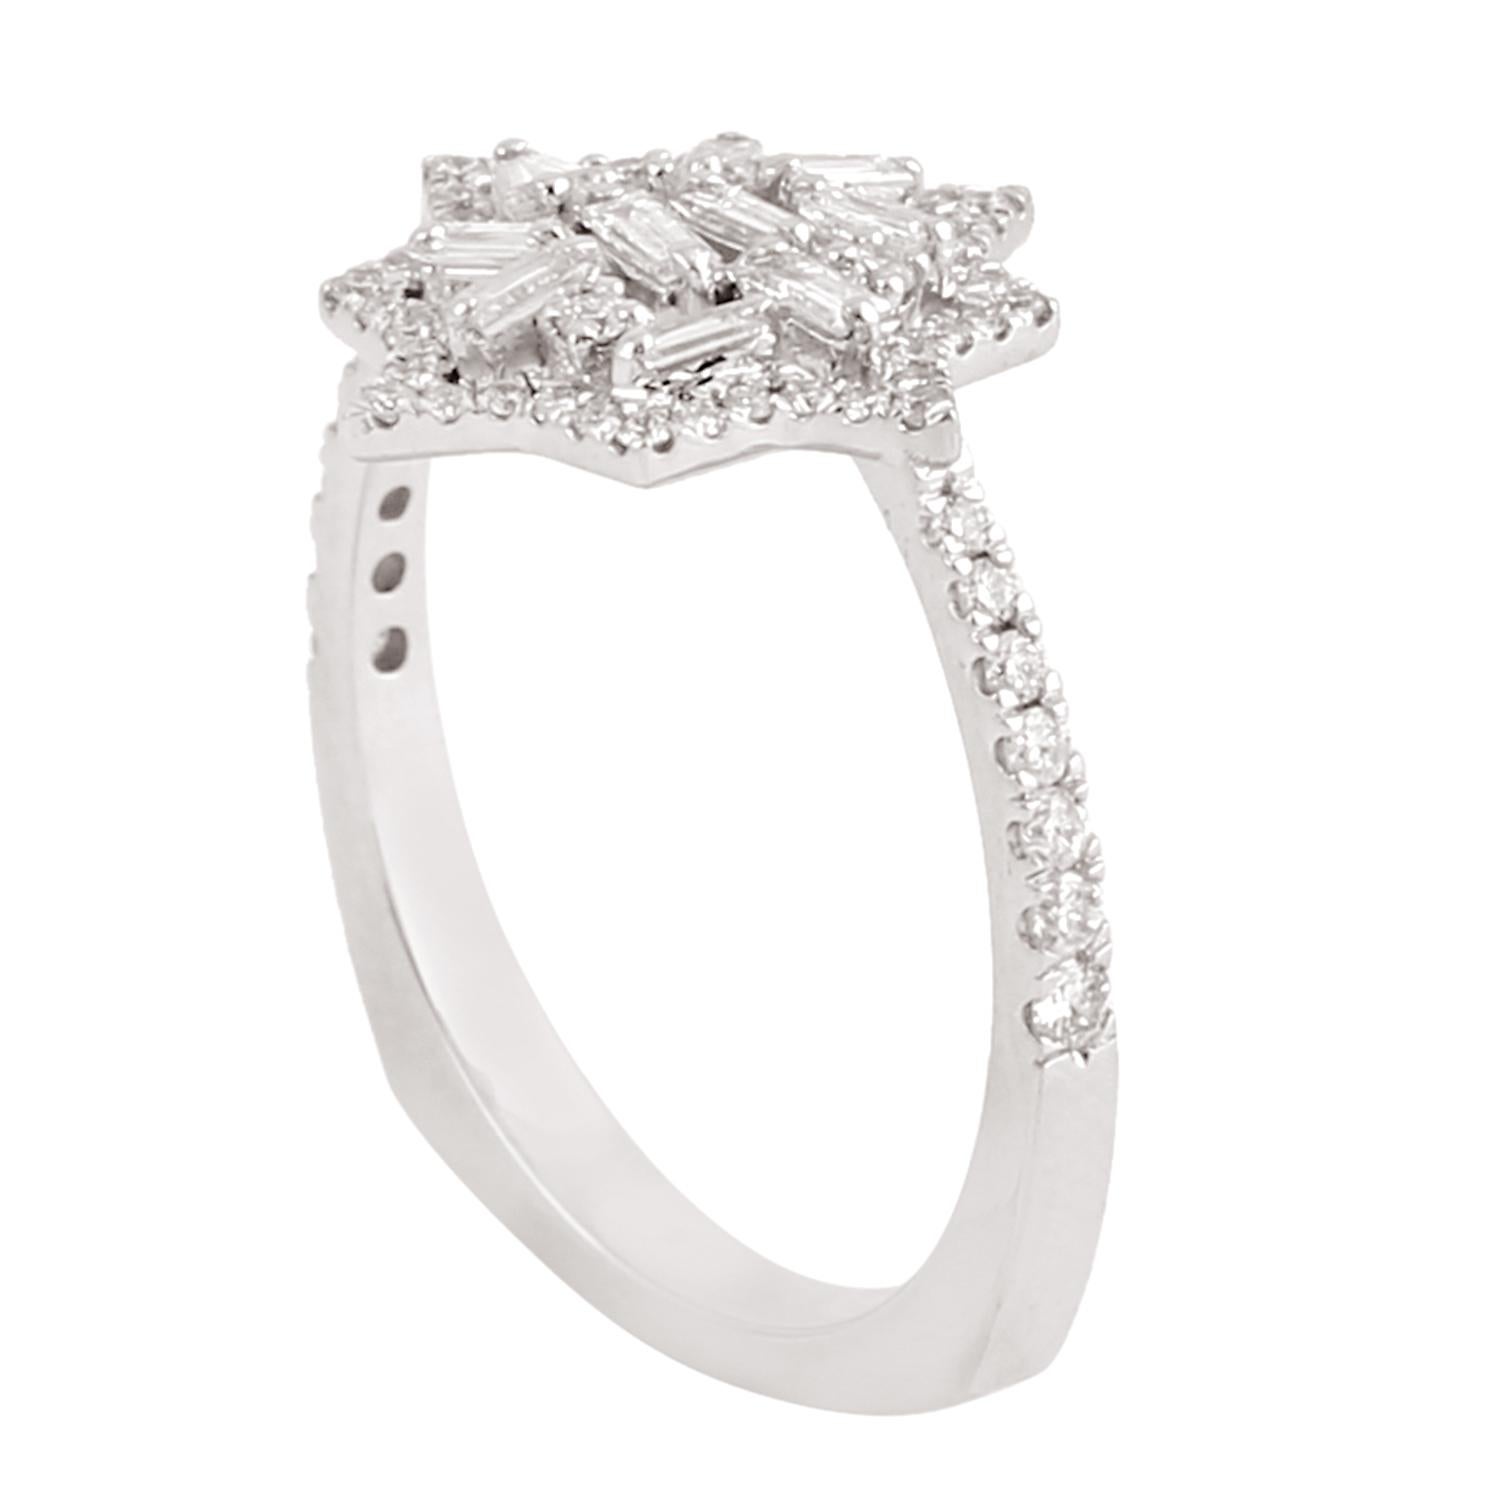 Mixed Cut Starburst Baguette Diamond Ring Made In 18k White Gold For Sale